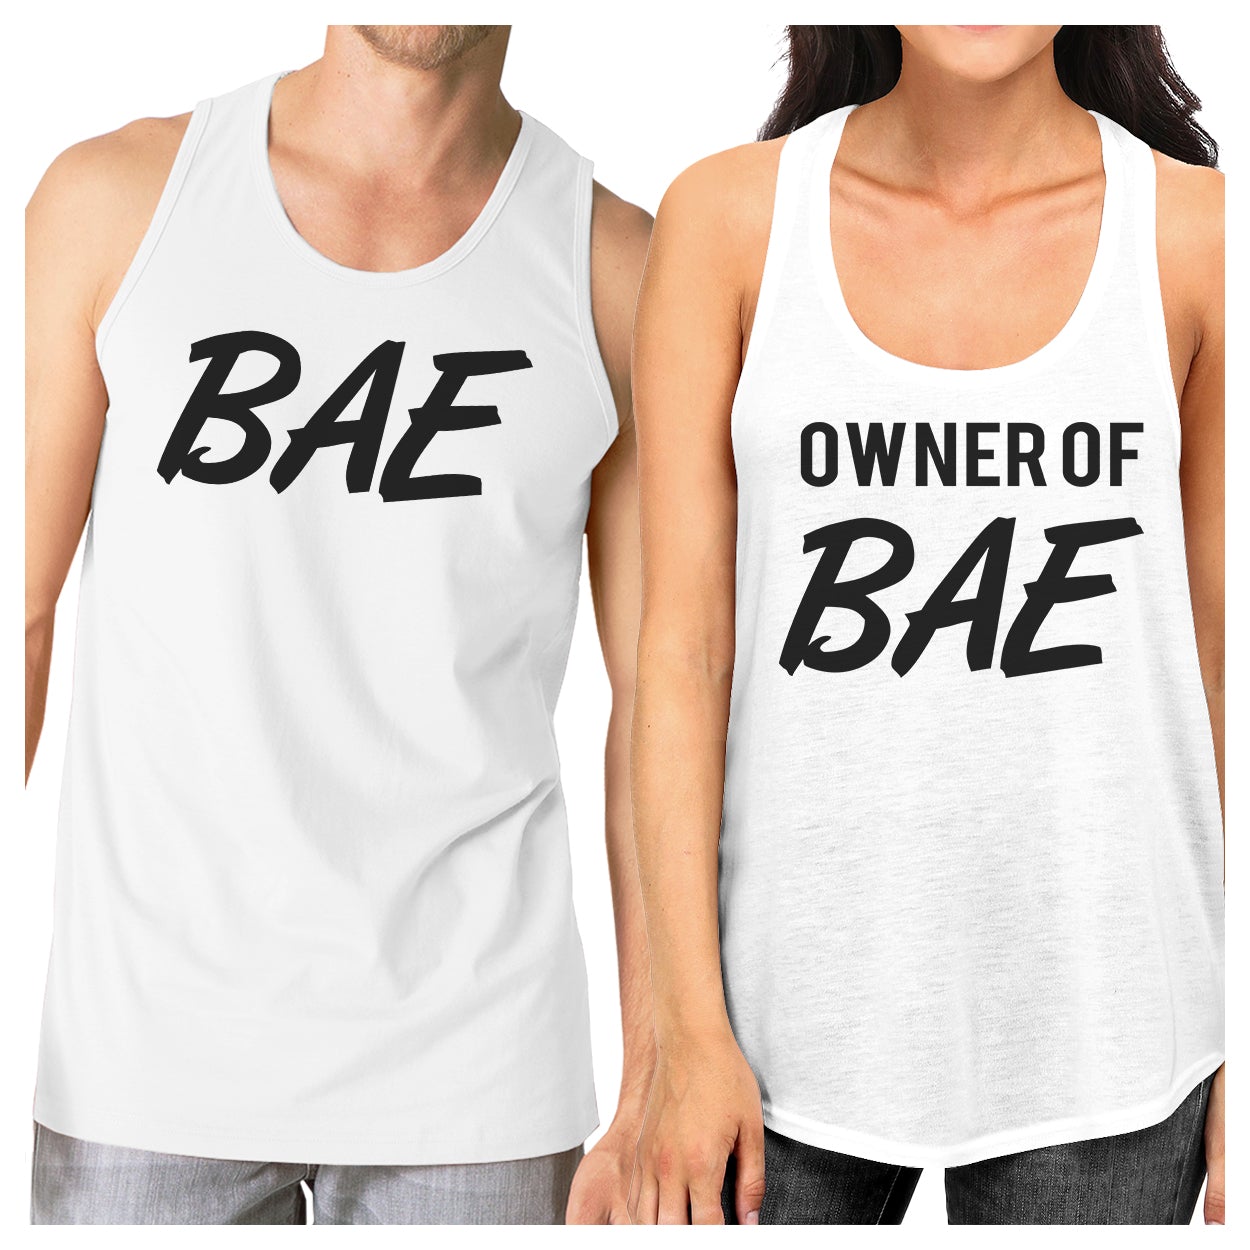 Bae And Owner Of Bae Matching Couple White Tank Tops